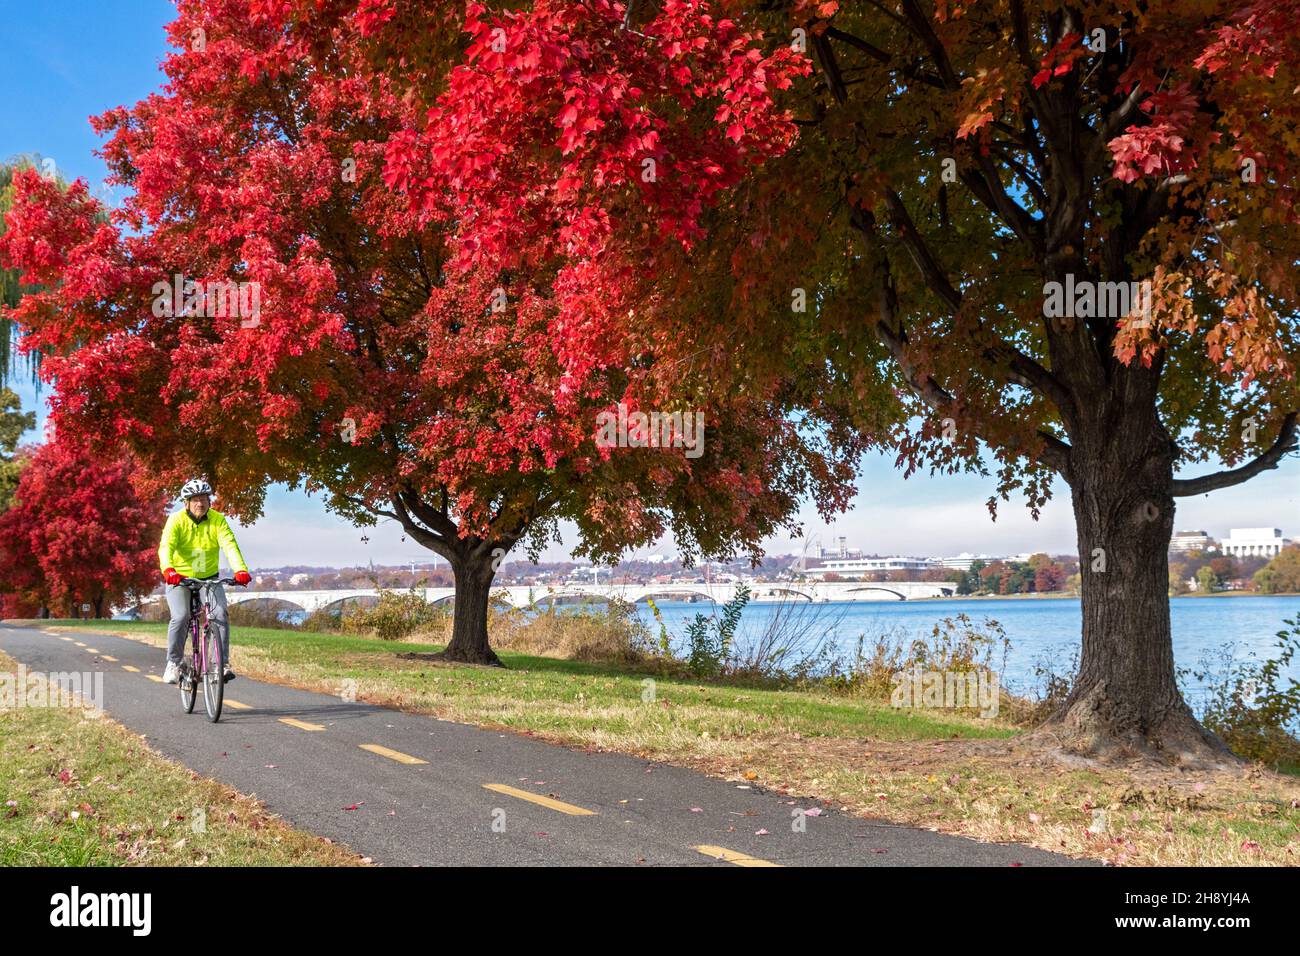 Arlington, Virginia - John West, 75, rides his bicycle along the extensive network of trails lining the Potomac River in Washington, DC and suburban V Stock Photo